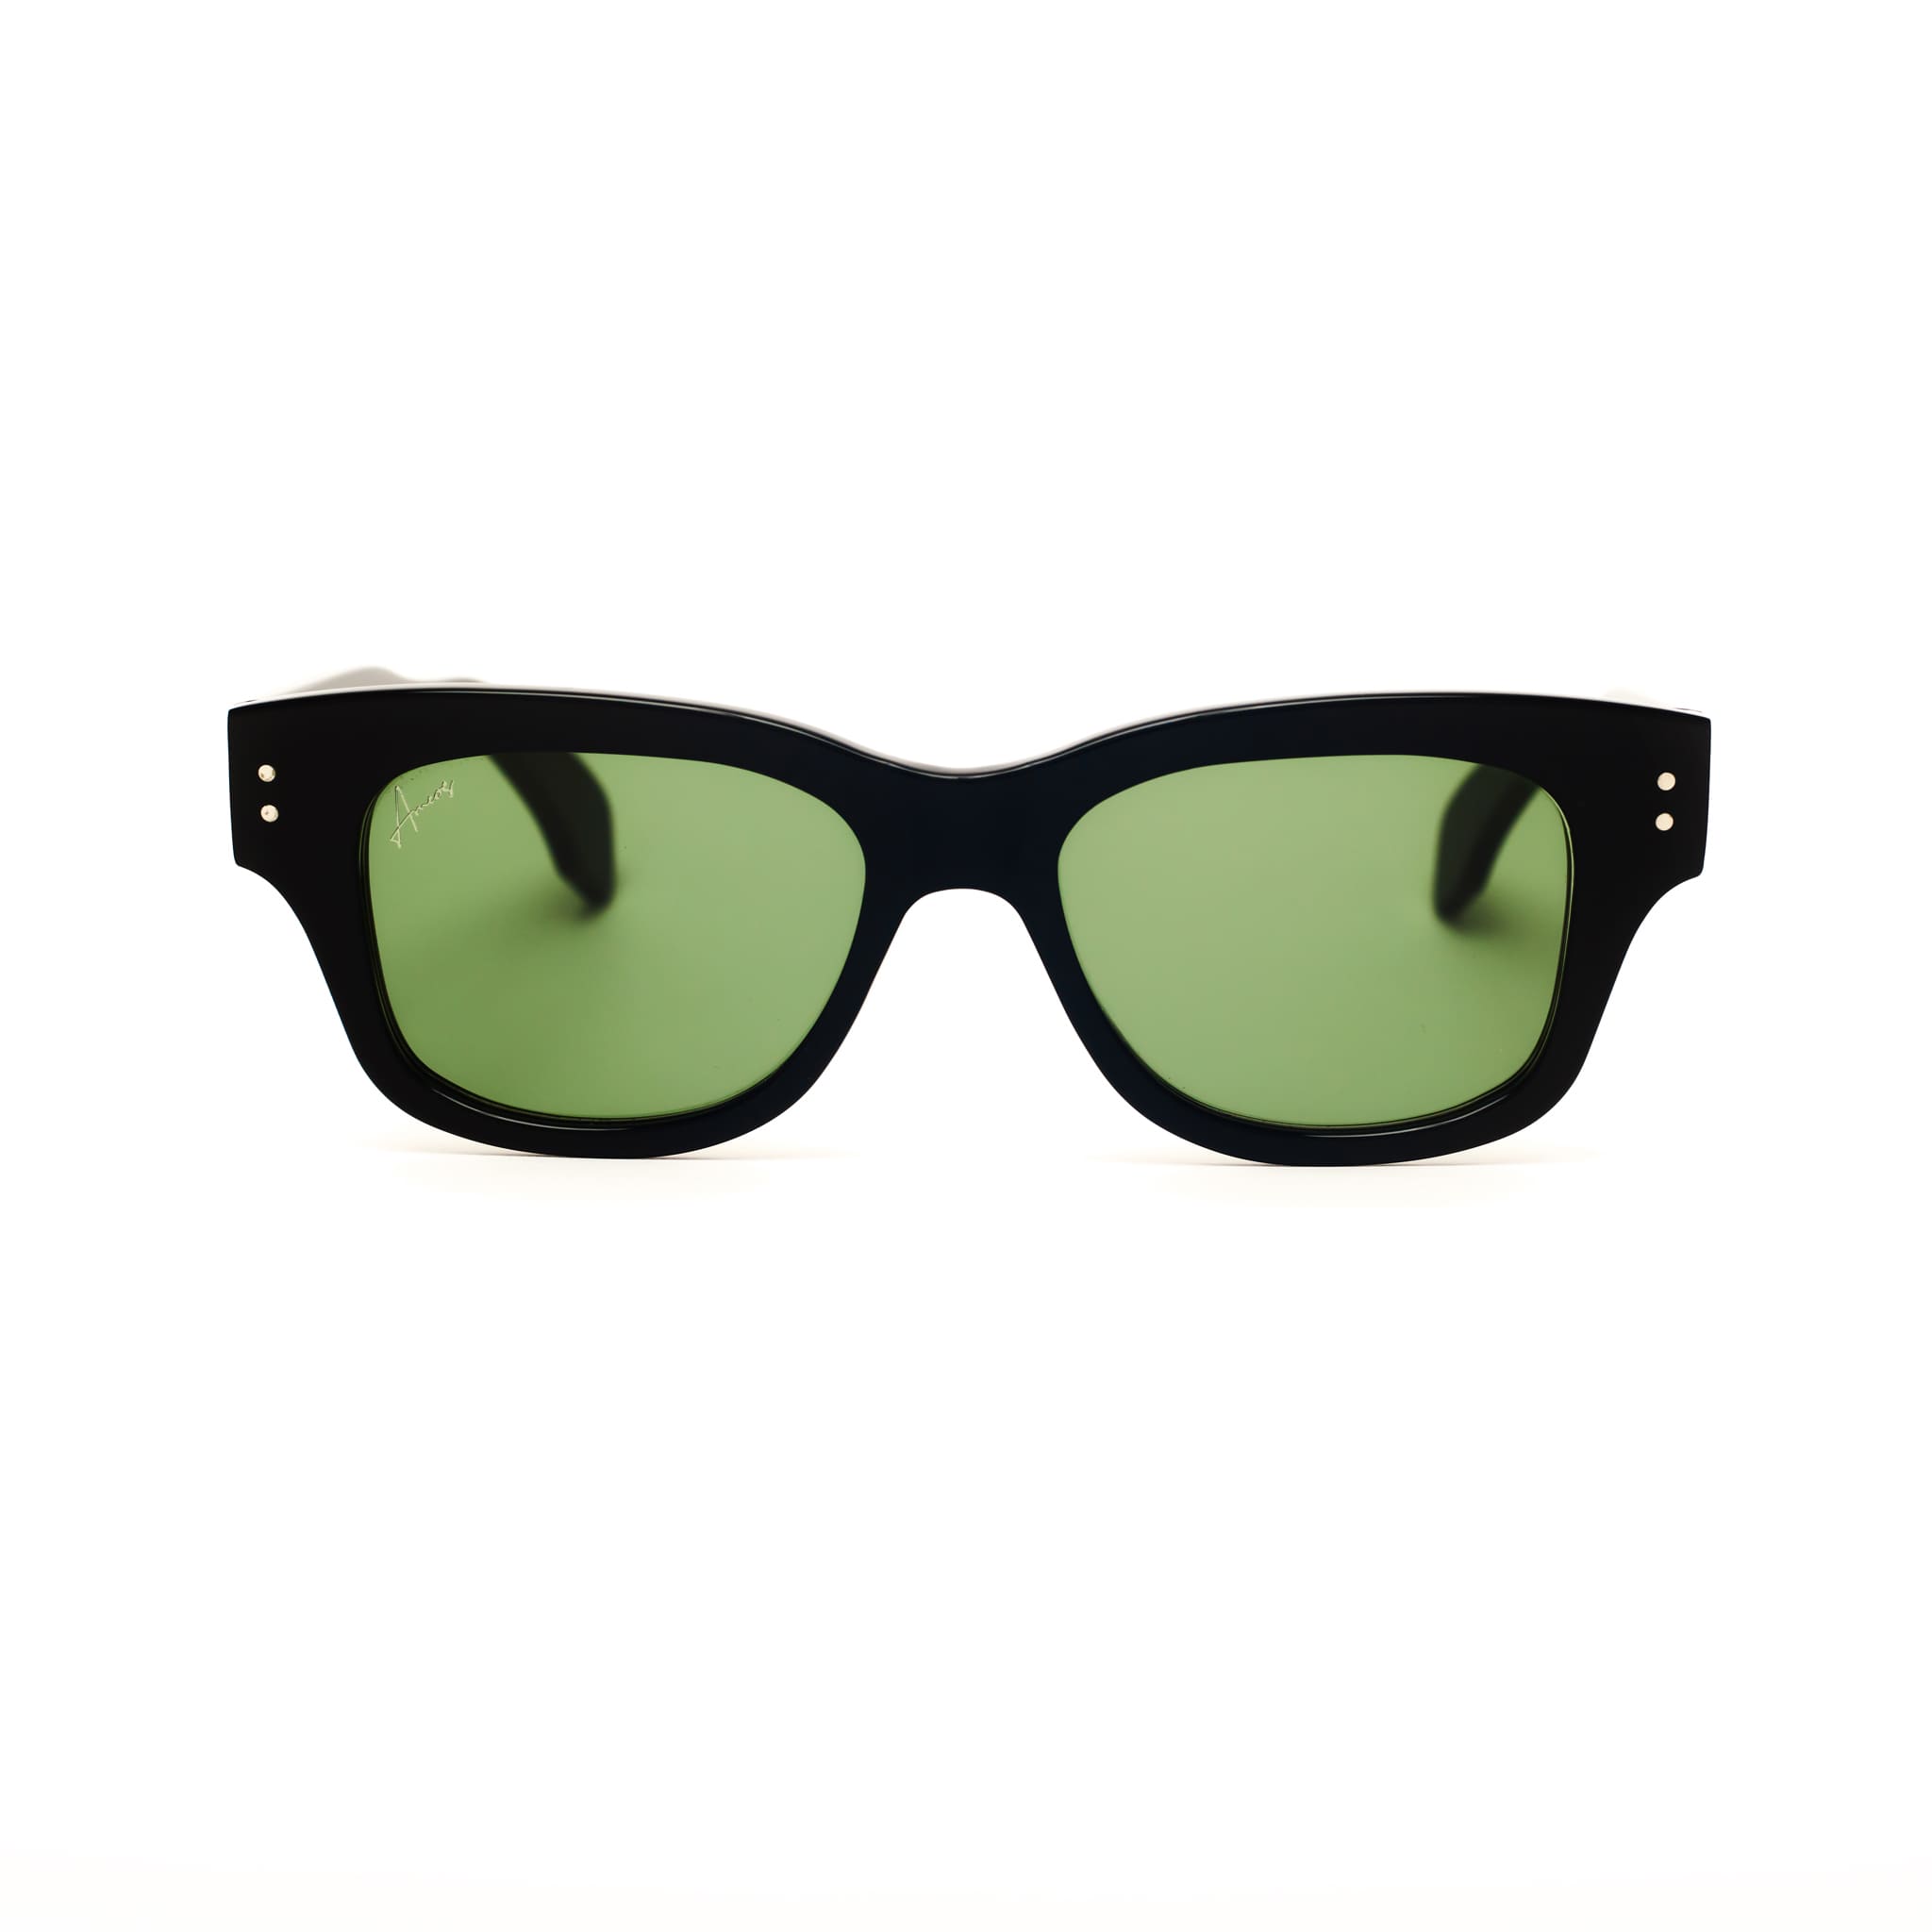 Ameos Forever collection Rio model. Black frames with dark green lenses. Front view. Genderless, gender neutral eyewear